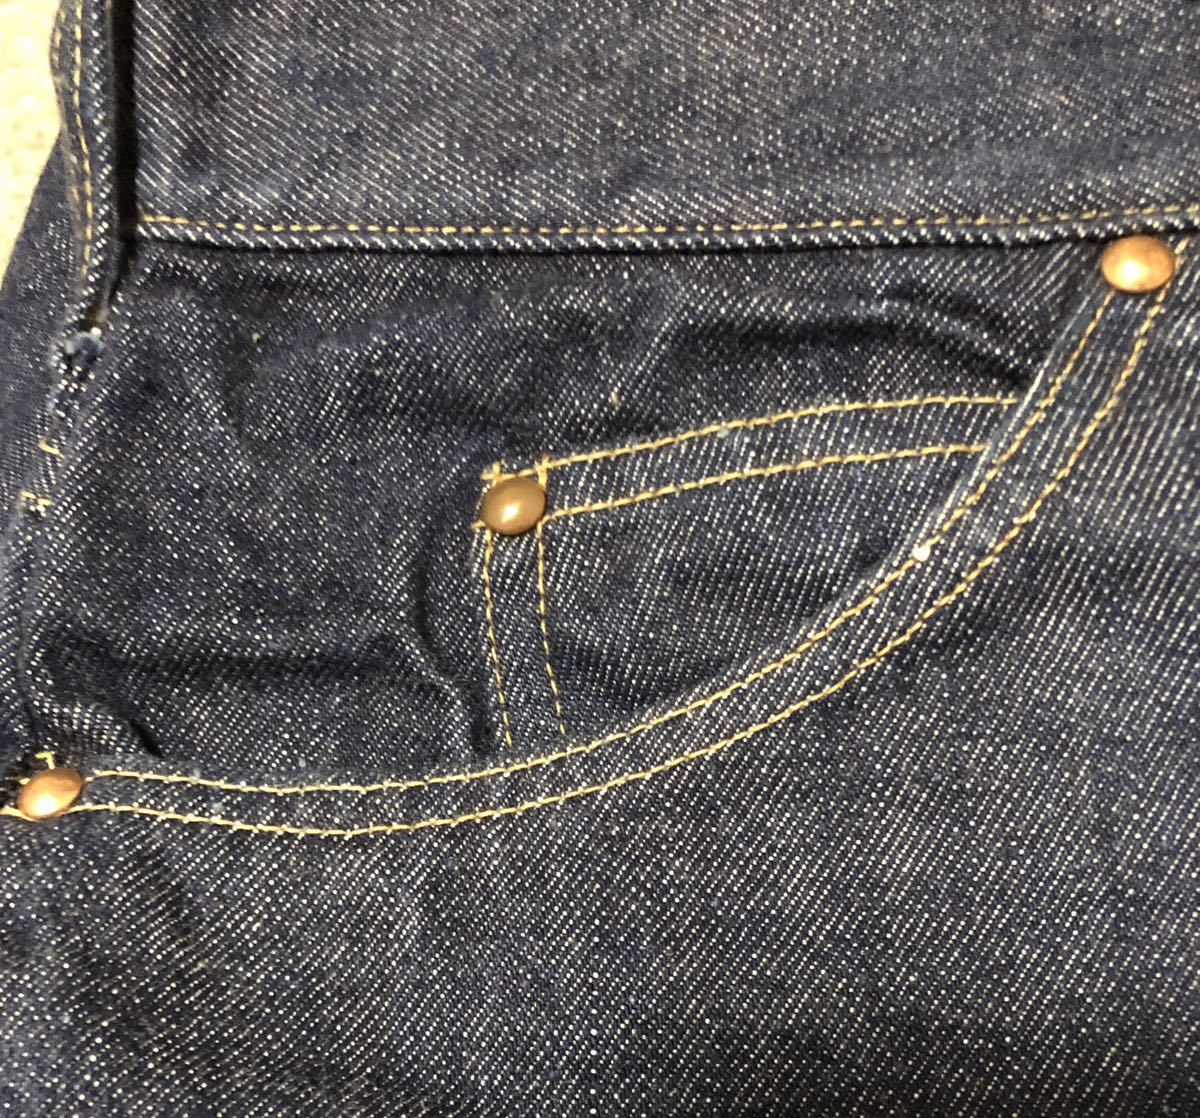 50's 濃紺PENNY'S FOREMOST 5POCKET JEANS W32/片耳！ペニーズ1WASH？の画像4